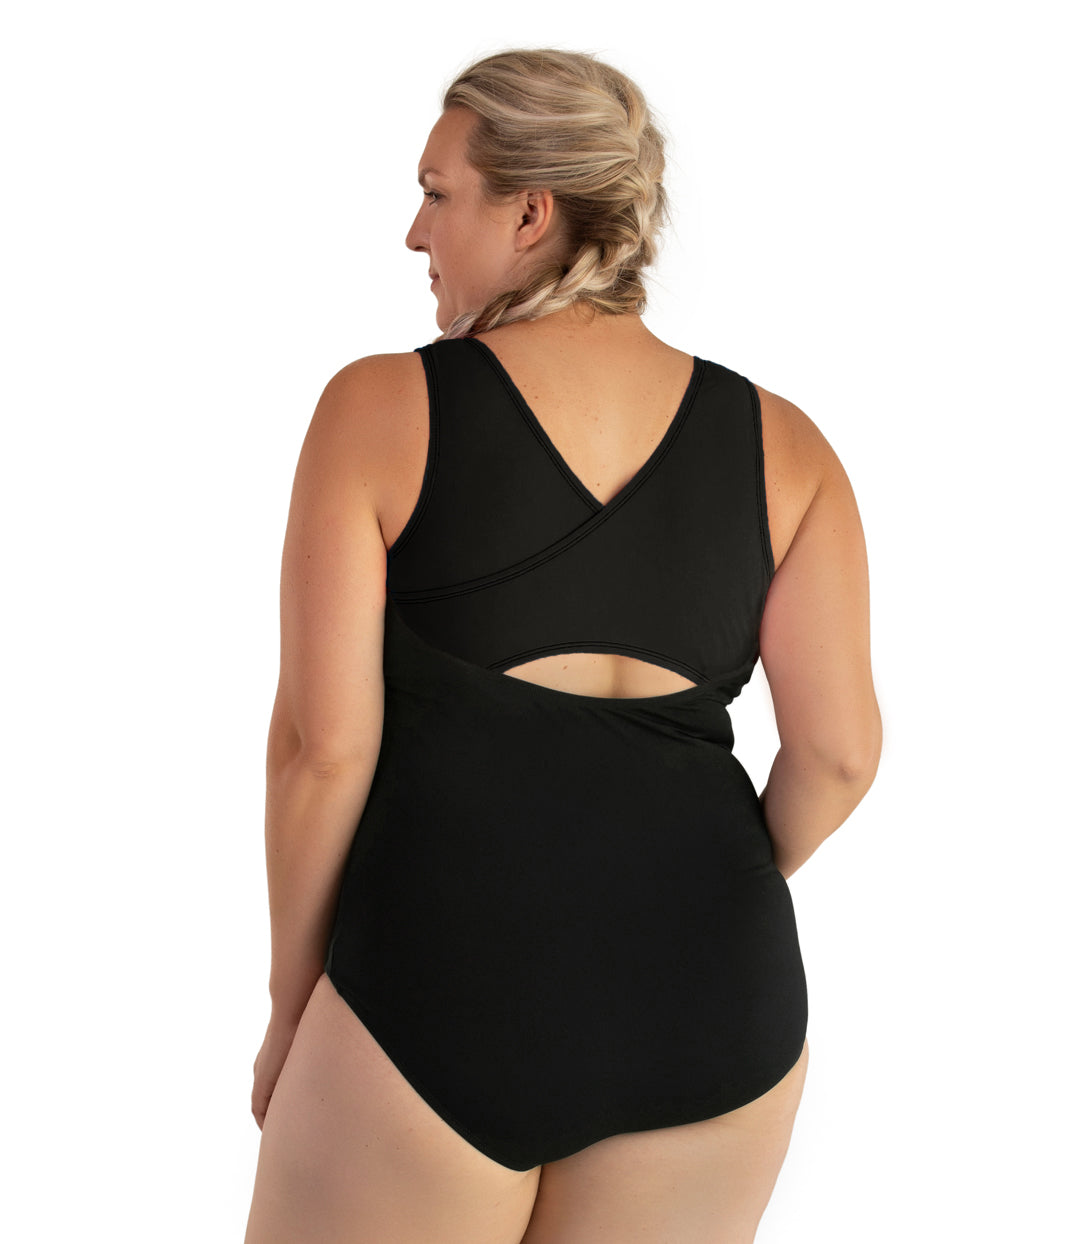 Plus size woman, back view, wearing JunoActive plus size AquaSport Crossback Tanksuit Black. The overlapping crossback detail of the tanksuit is black. The main body of the suit is solid black, keyhole opening at the mid-back.